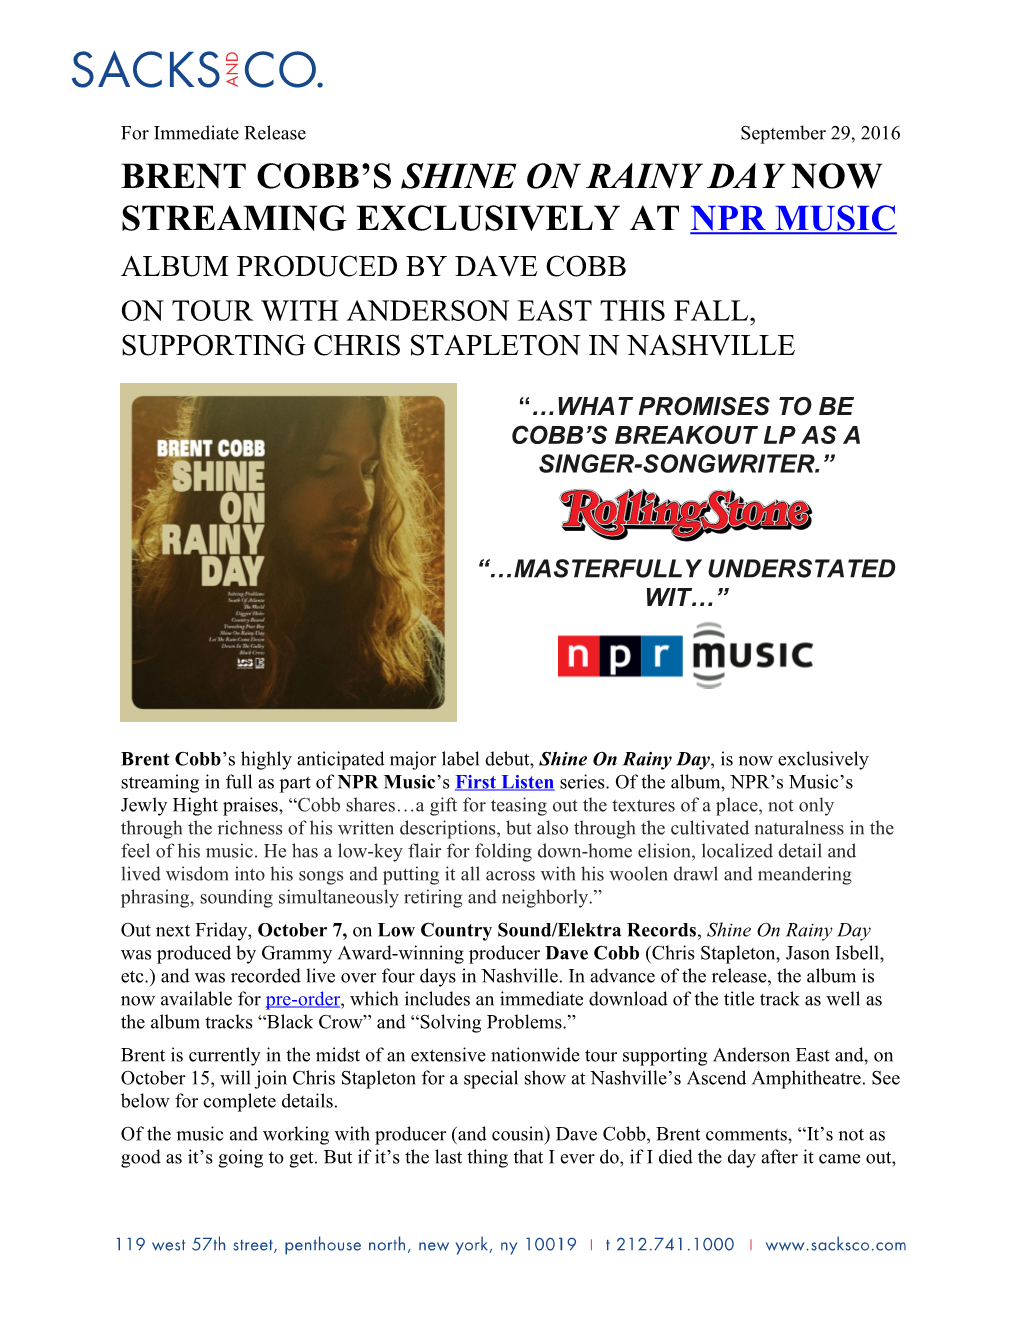 Brent Cobb Sshine on Rainy Day Now Streaming Exclusively at Npr Music